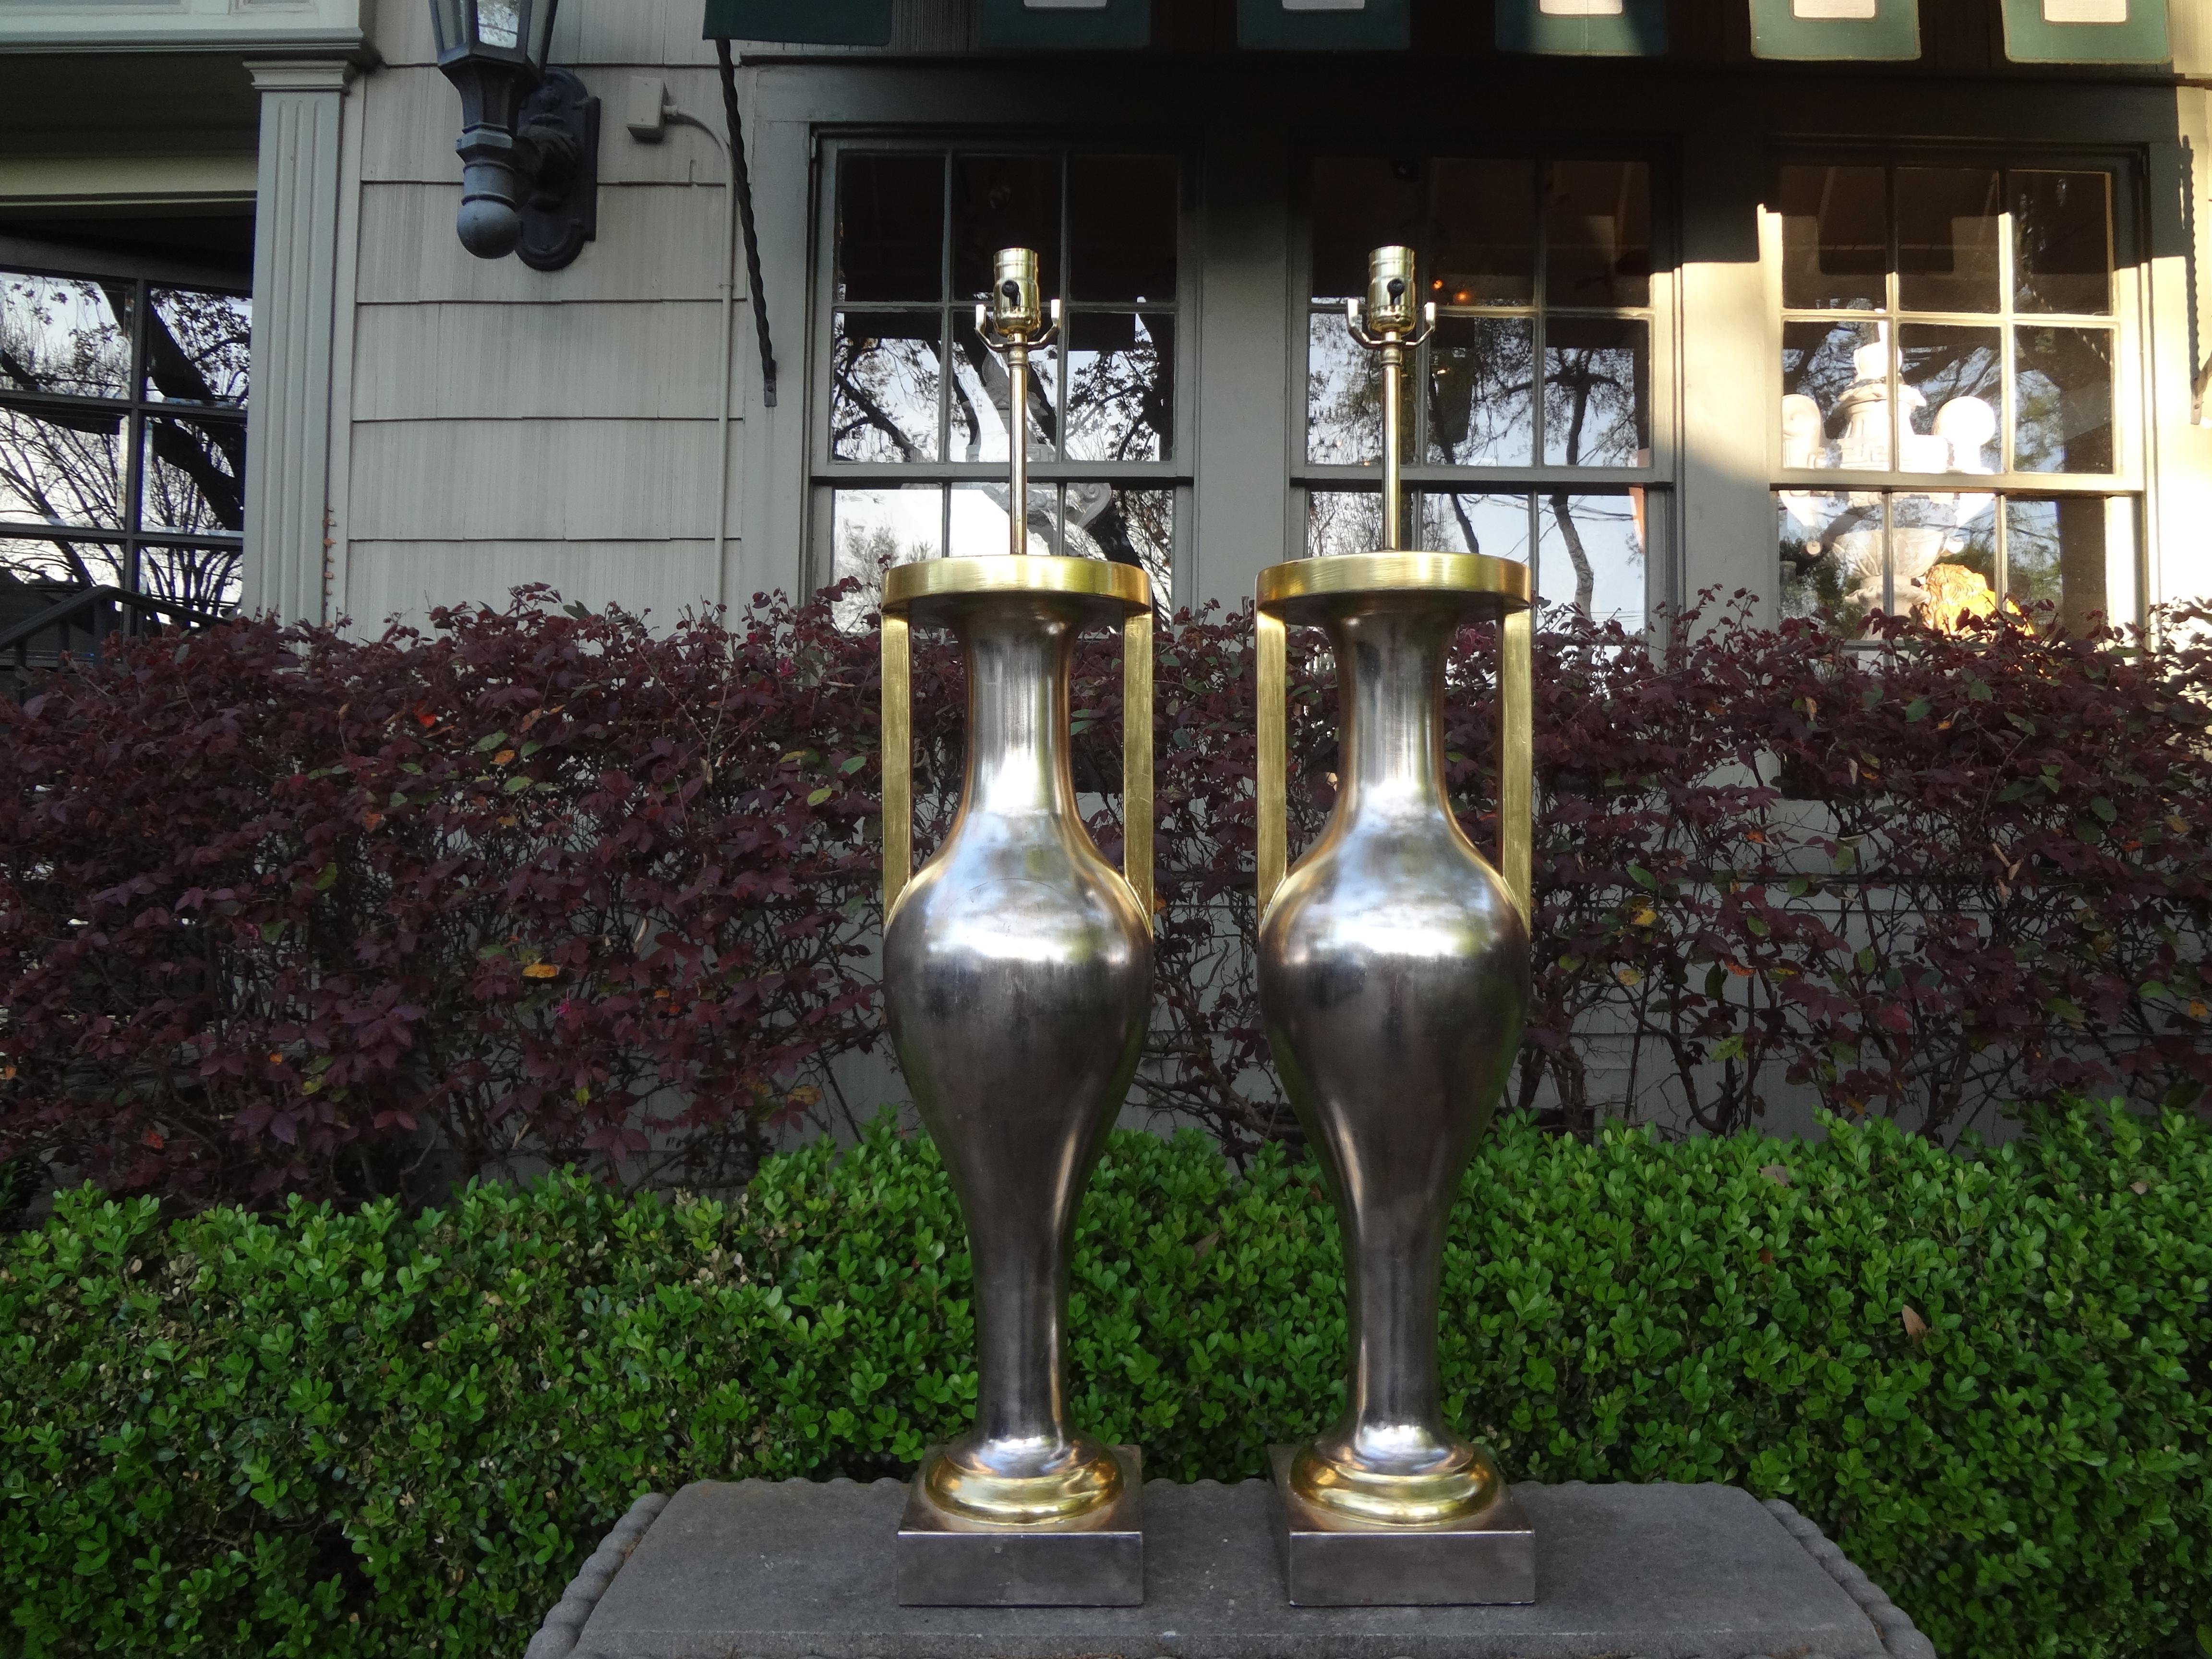 Pair of monumental Neoclassical style silver and gold giltwood urn form lamps.
Sensational pair of Neoclassical style silver gilt wood urn form lamps with gold giltwood handles. This monumental pair of silver leaf and gold leaf urn lamps attributed